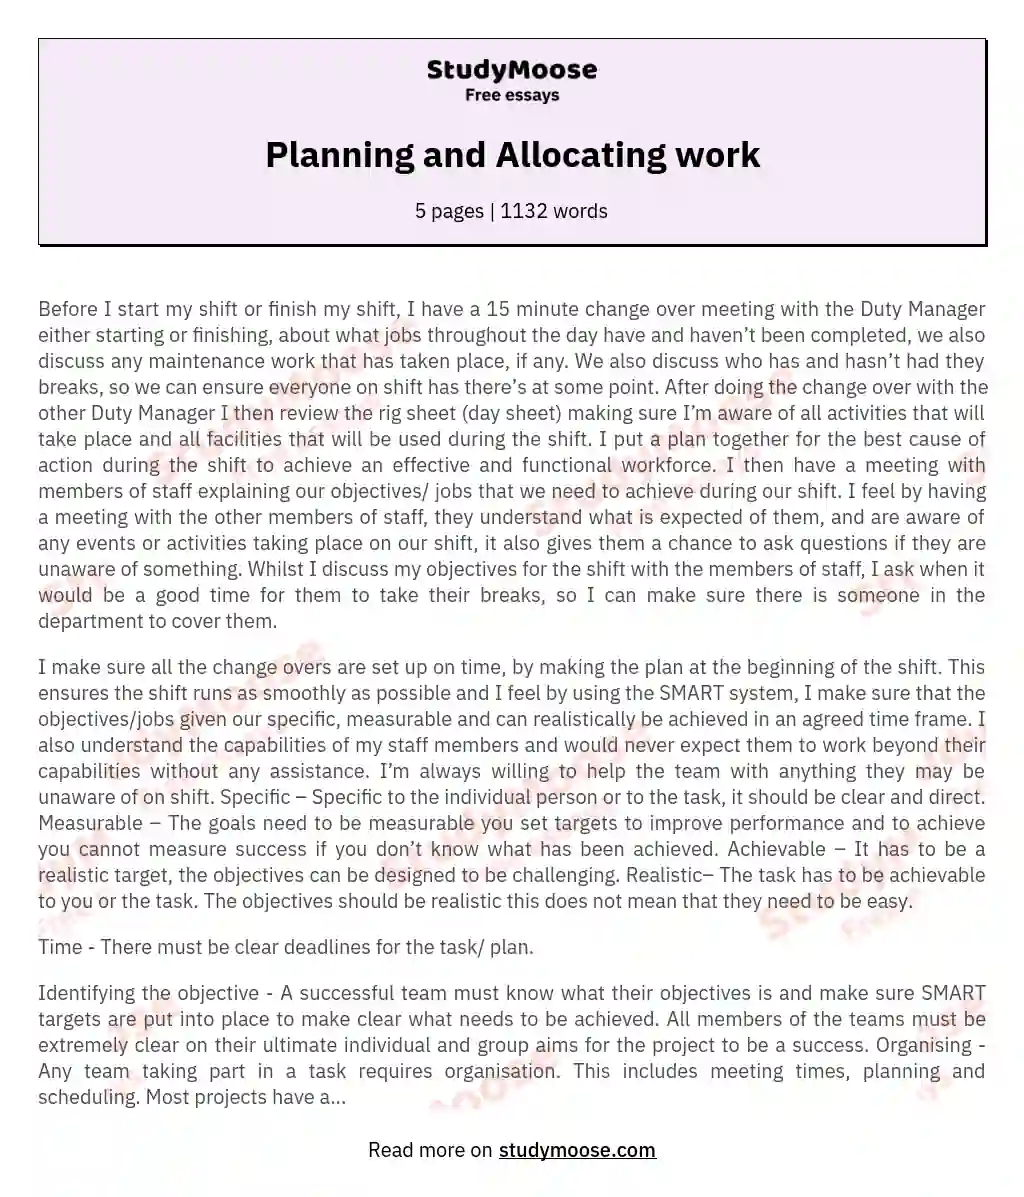 Planning and Allocating work essay